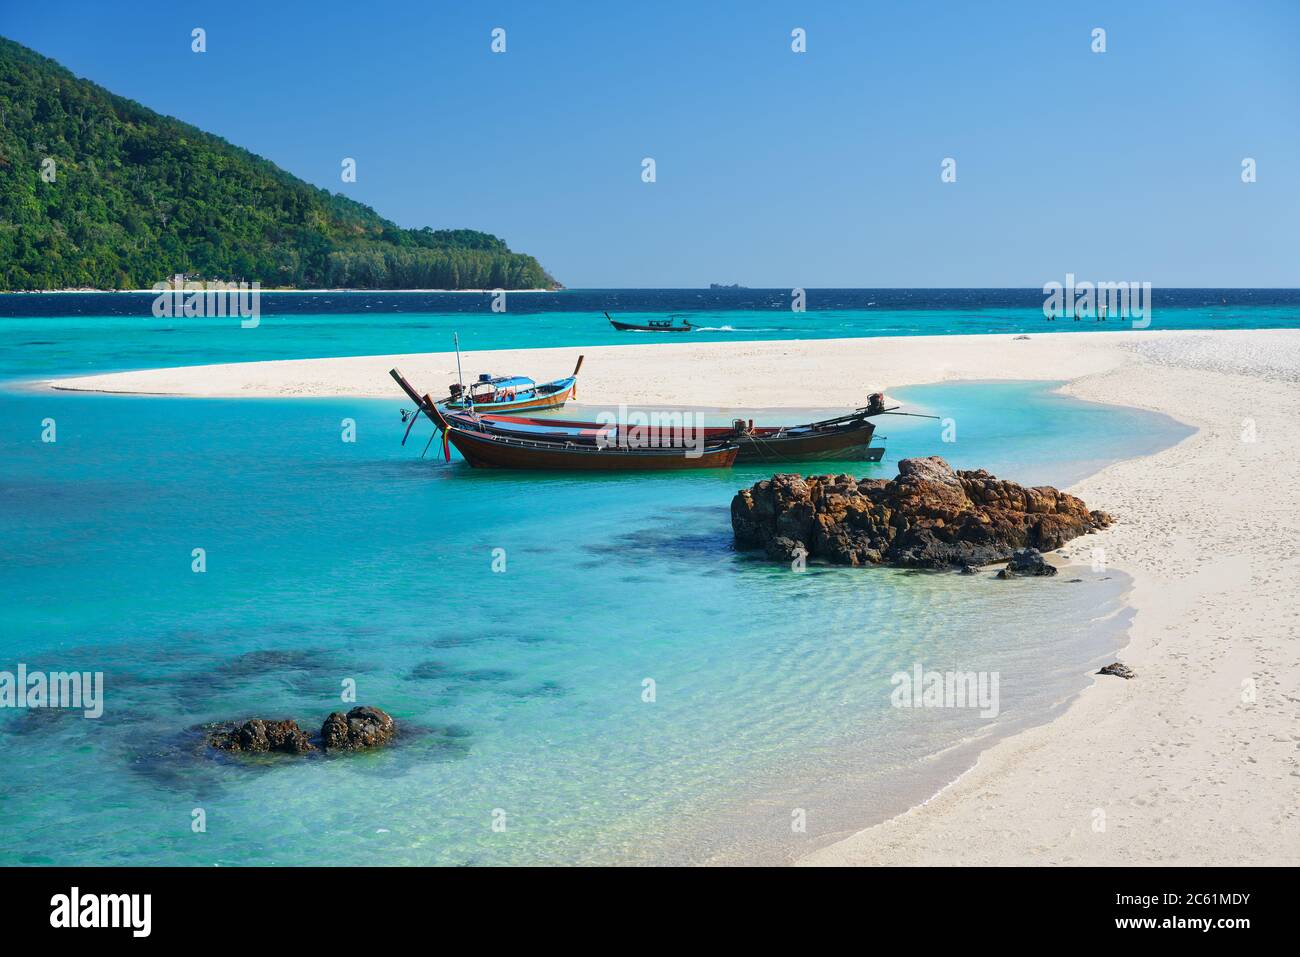 Boat on tropical white sandy beach and turquoise water. Summer holiday, nature background Stock Photo